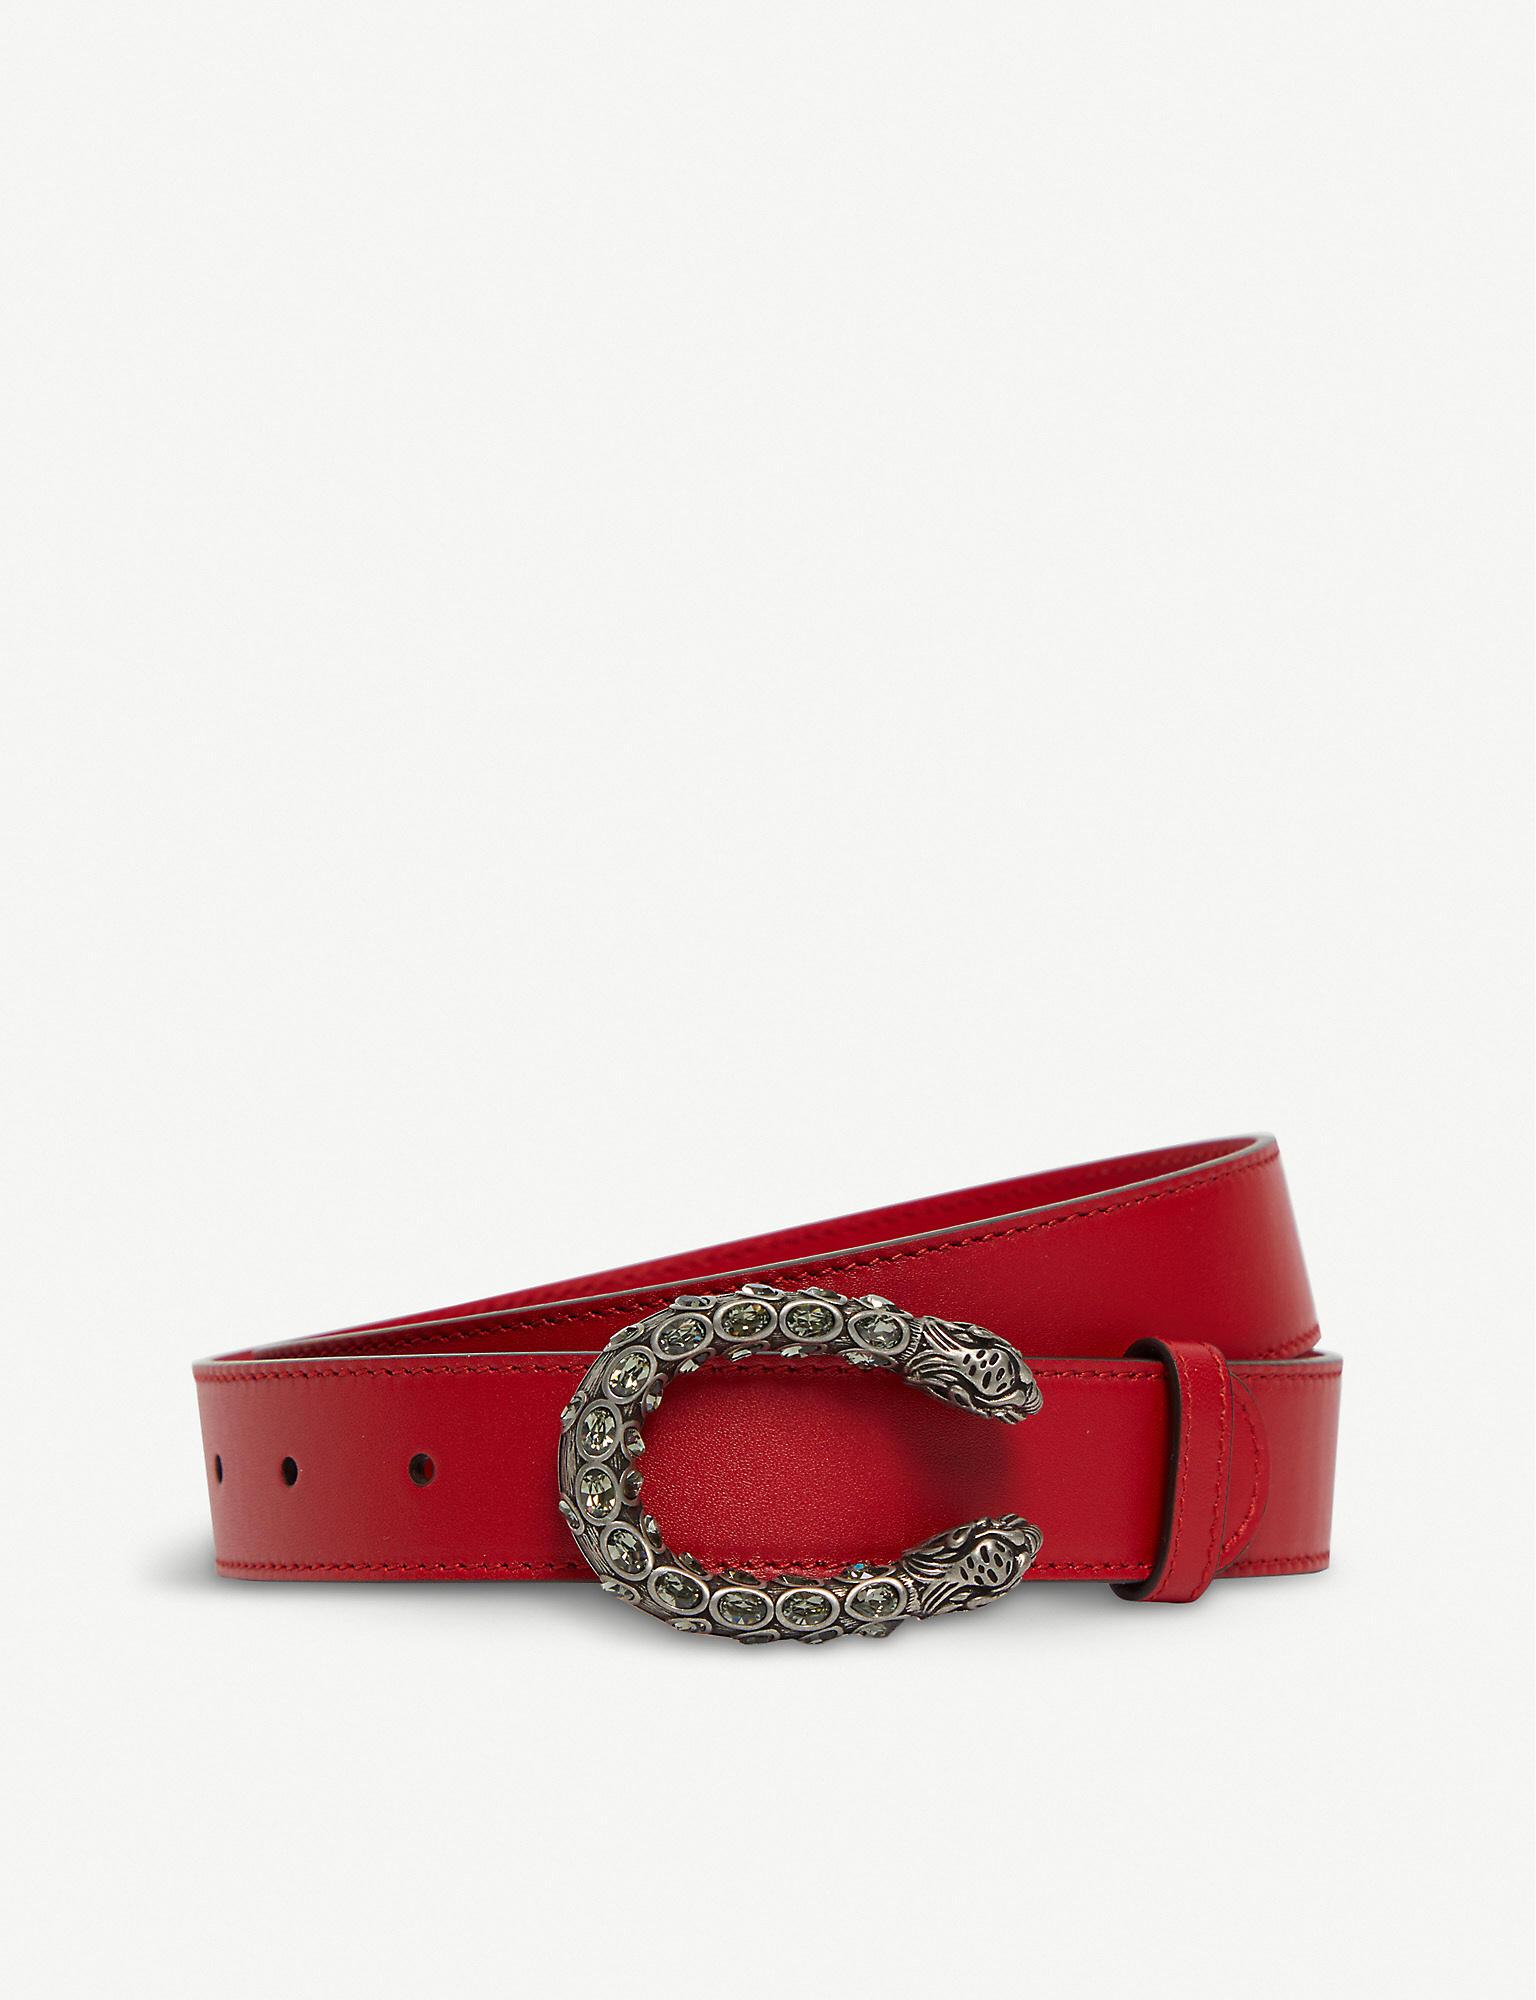 Gucci Dionysus Leather Belt in Red - Lyst